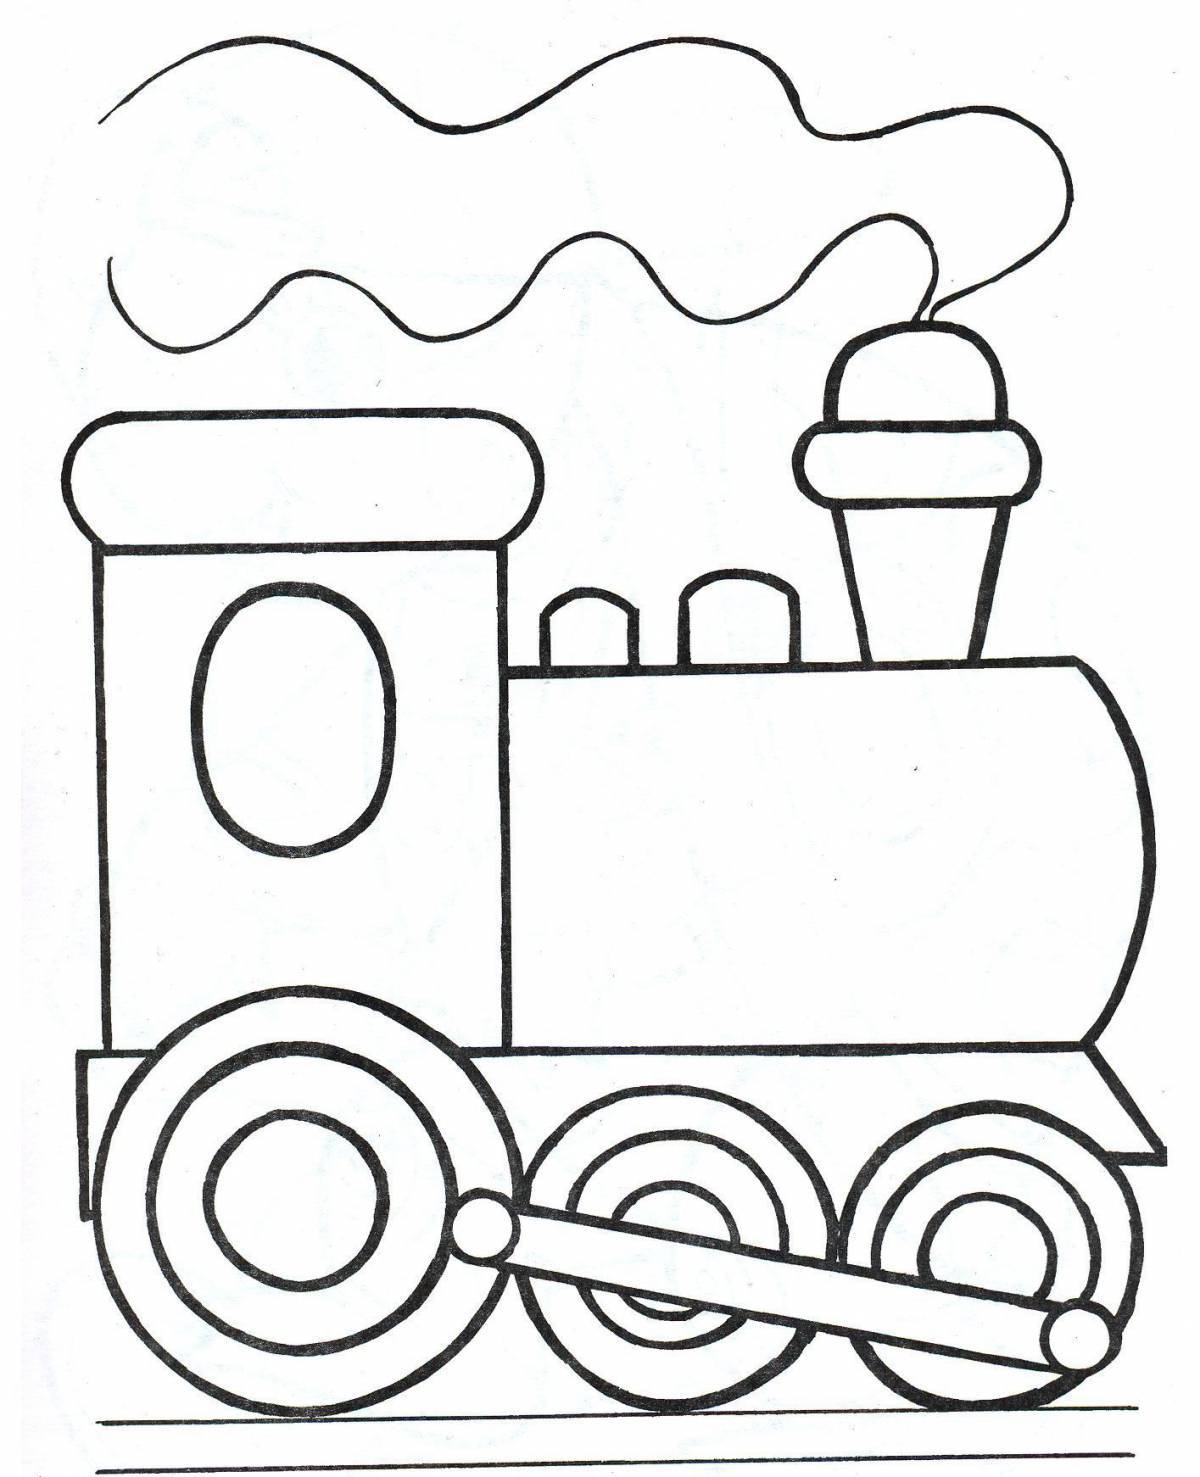 Living transport coloring book for children 3-4 years old